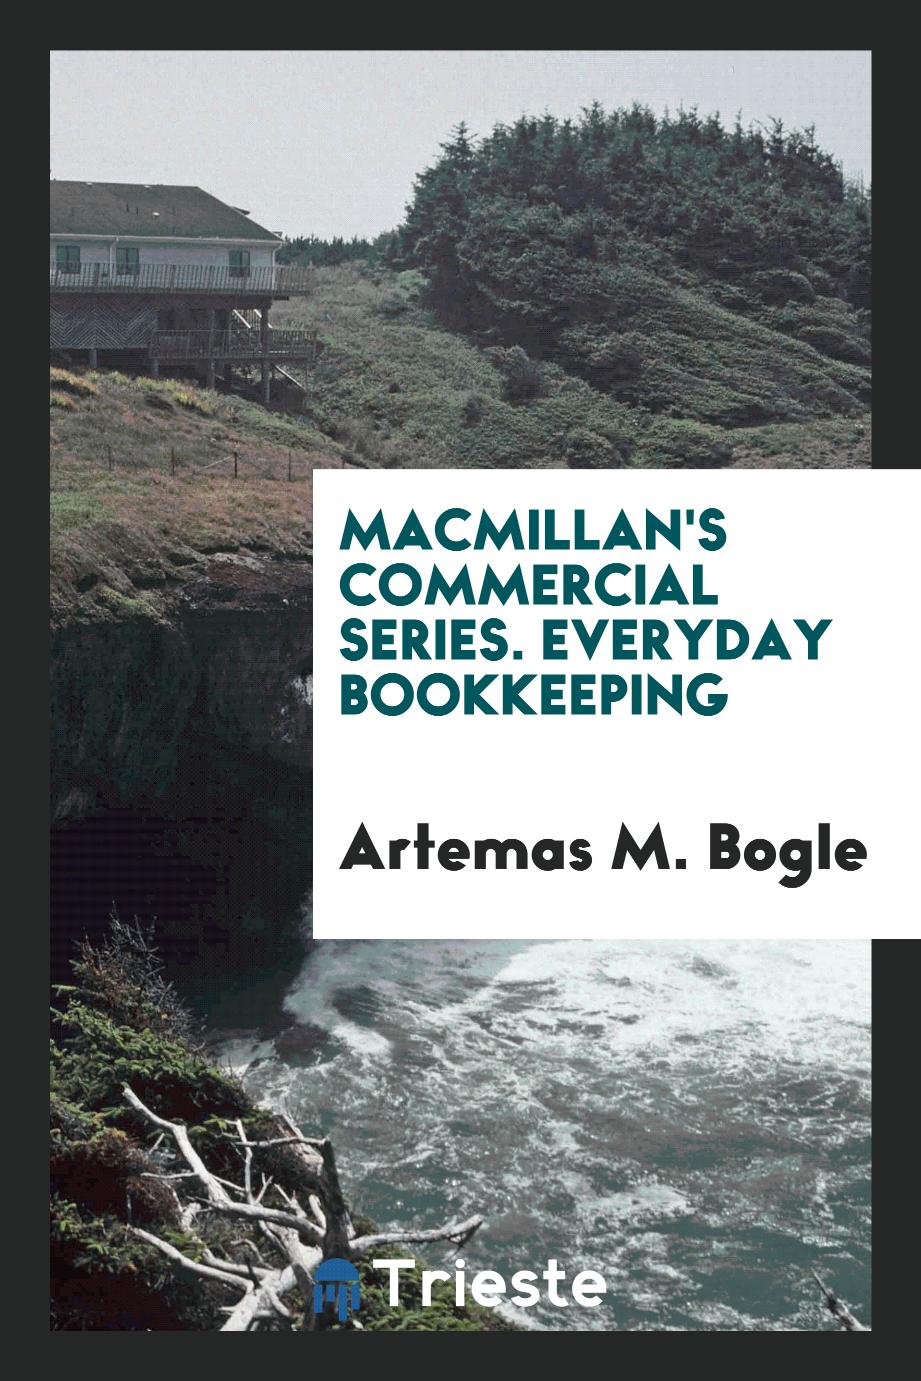 Macmillan's Commercial Series. Everyday Bookkeeping